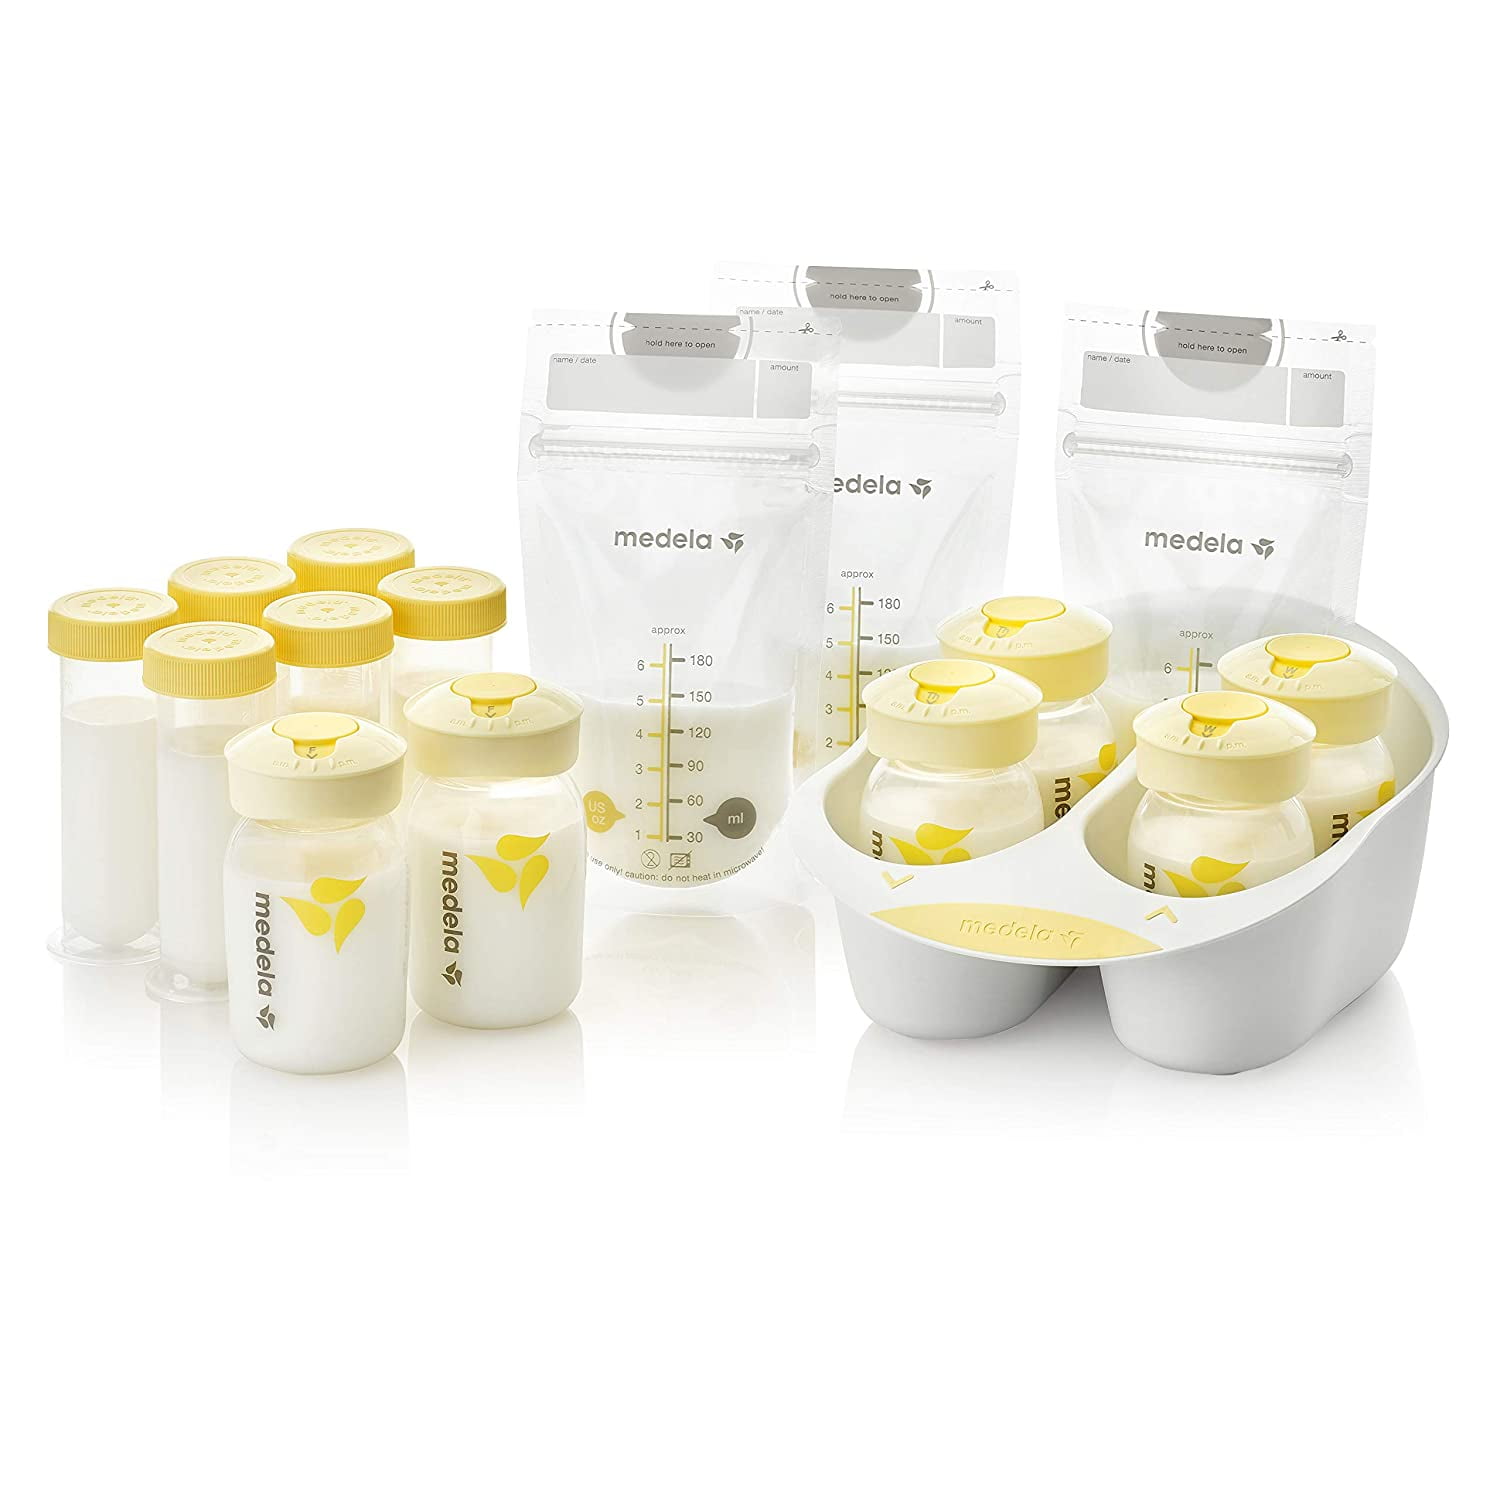 Medela Breast Milk Storage Solution Set, Breastfeeding Supplies &  Containers, Breastmilk Organizer & Bags, Made Without BPA